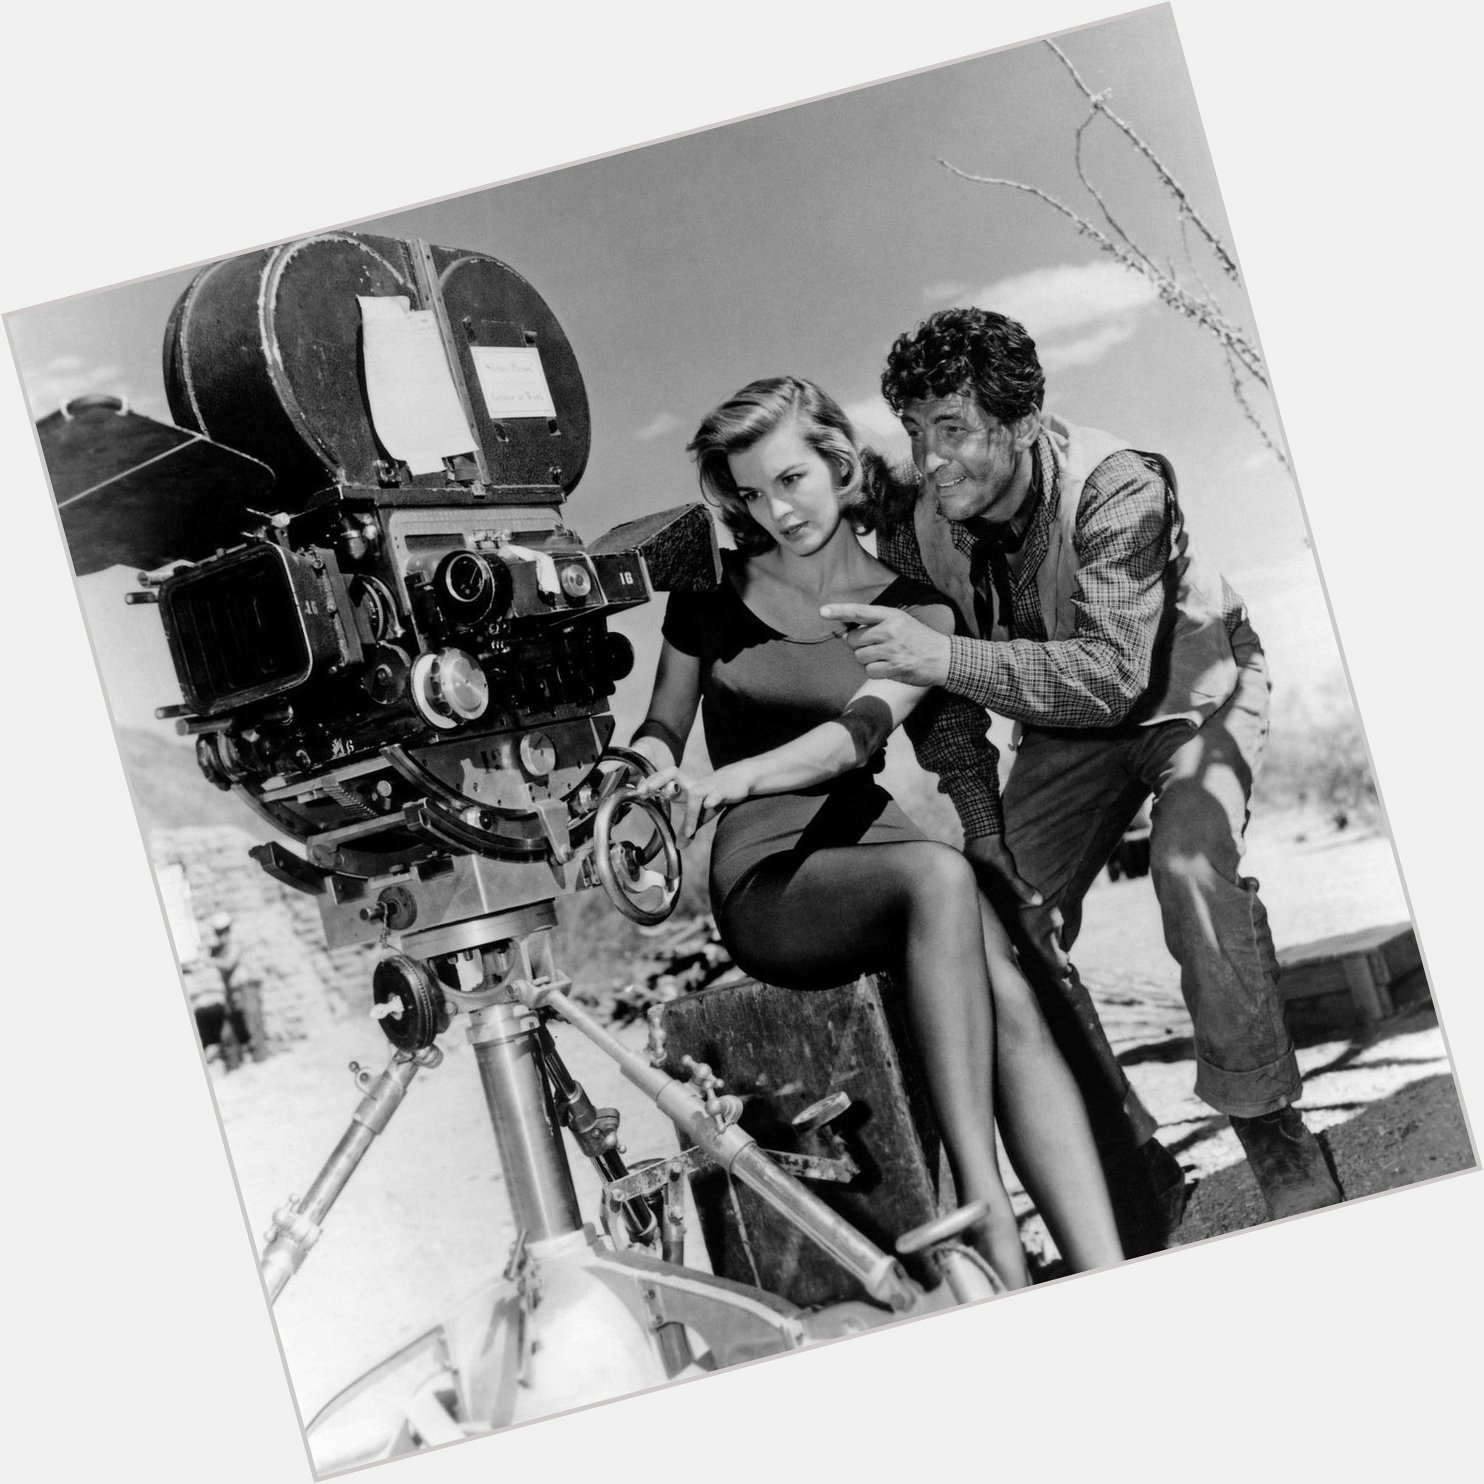 Wishing a happy birthday to Angie Dickinson, seen here with Dean Martin on the set of Rio Bravo (1959) 